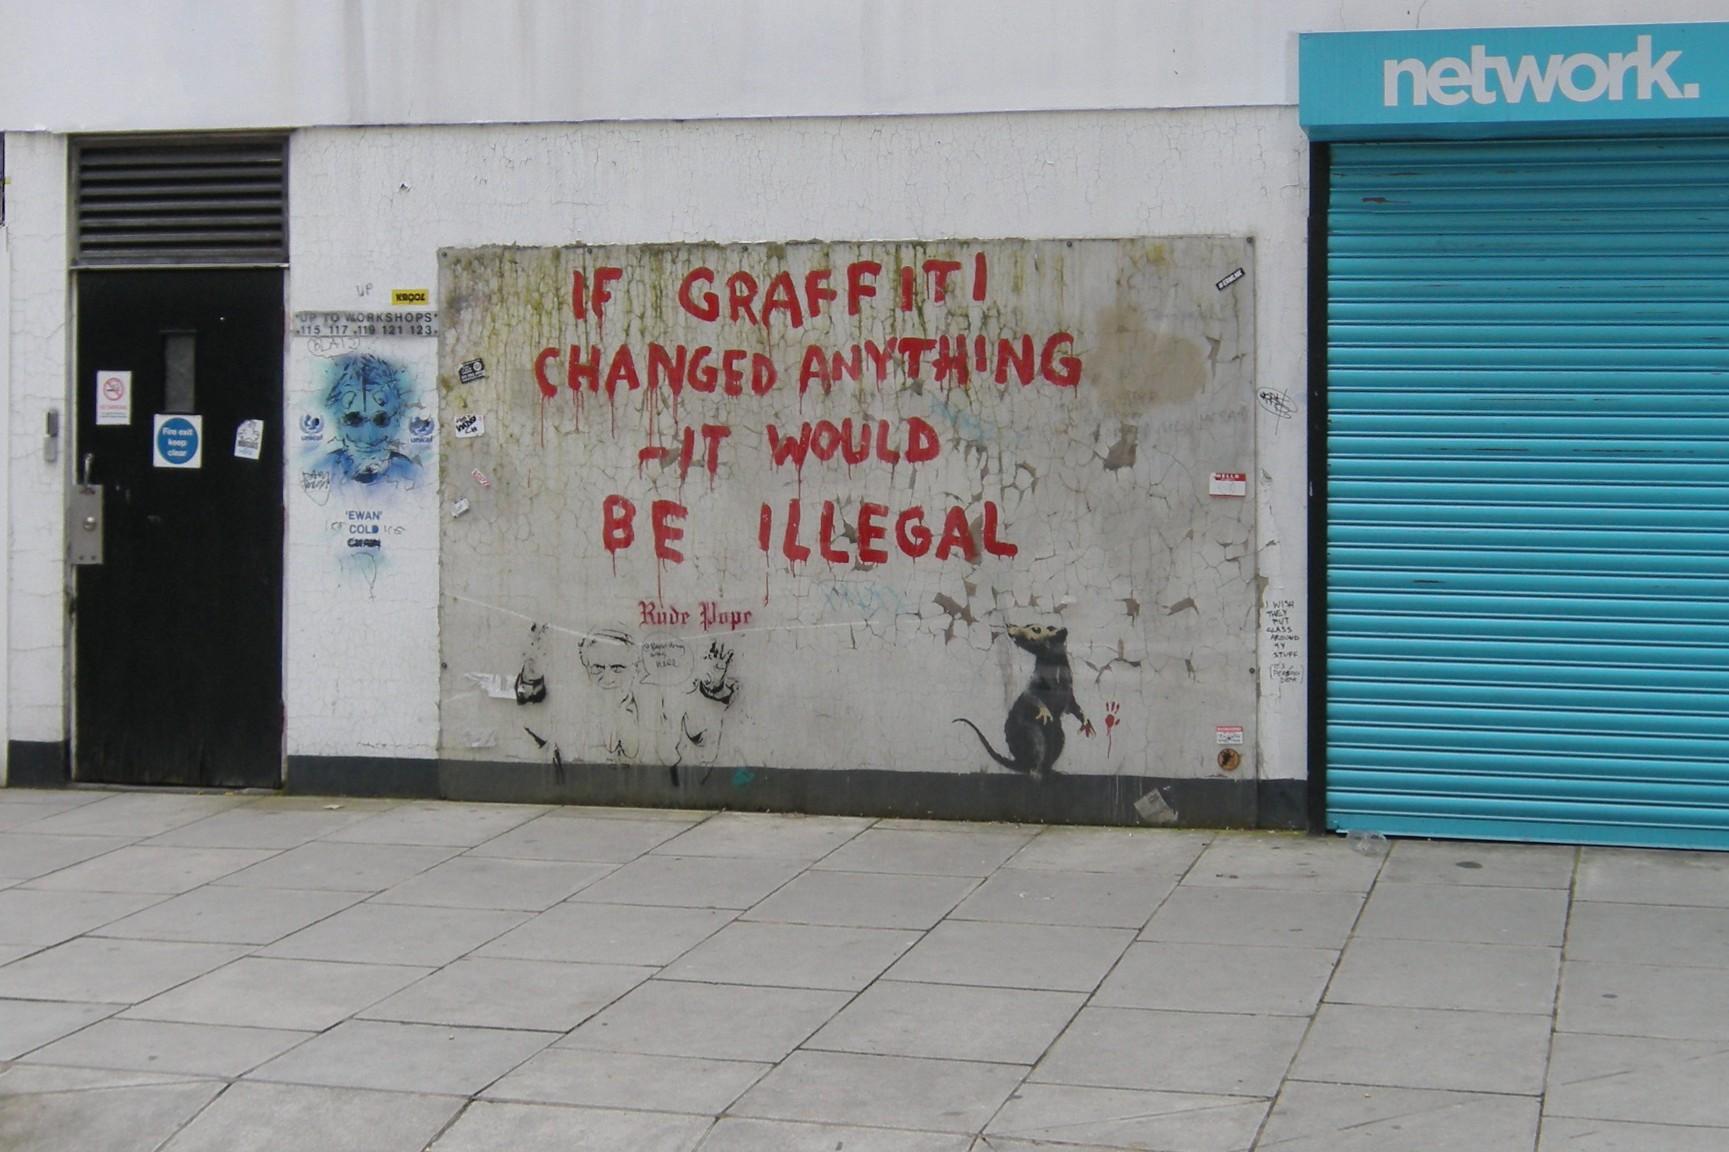 Banksy mural of a rat with text reading "if graffiti changed anything it would be illegal"